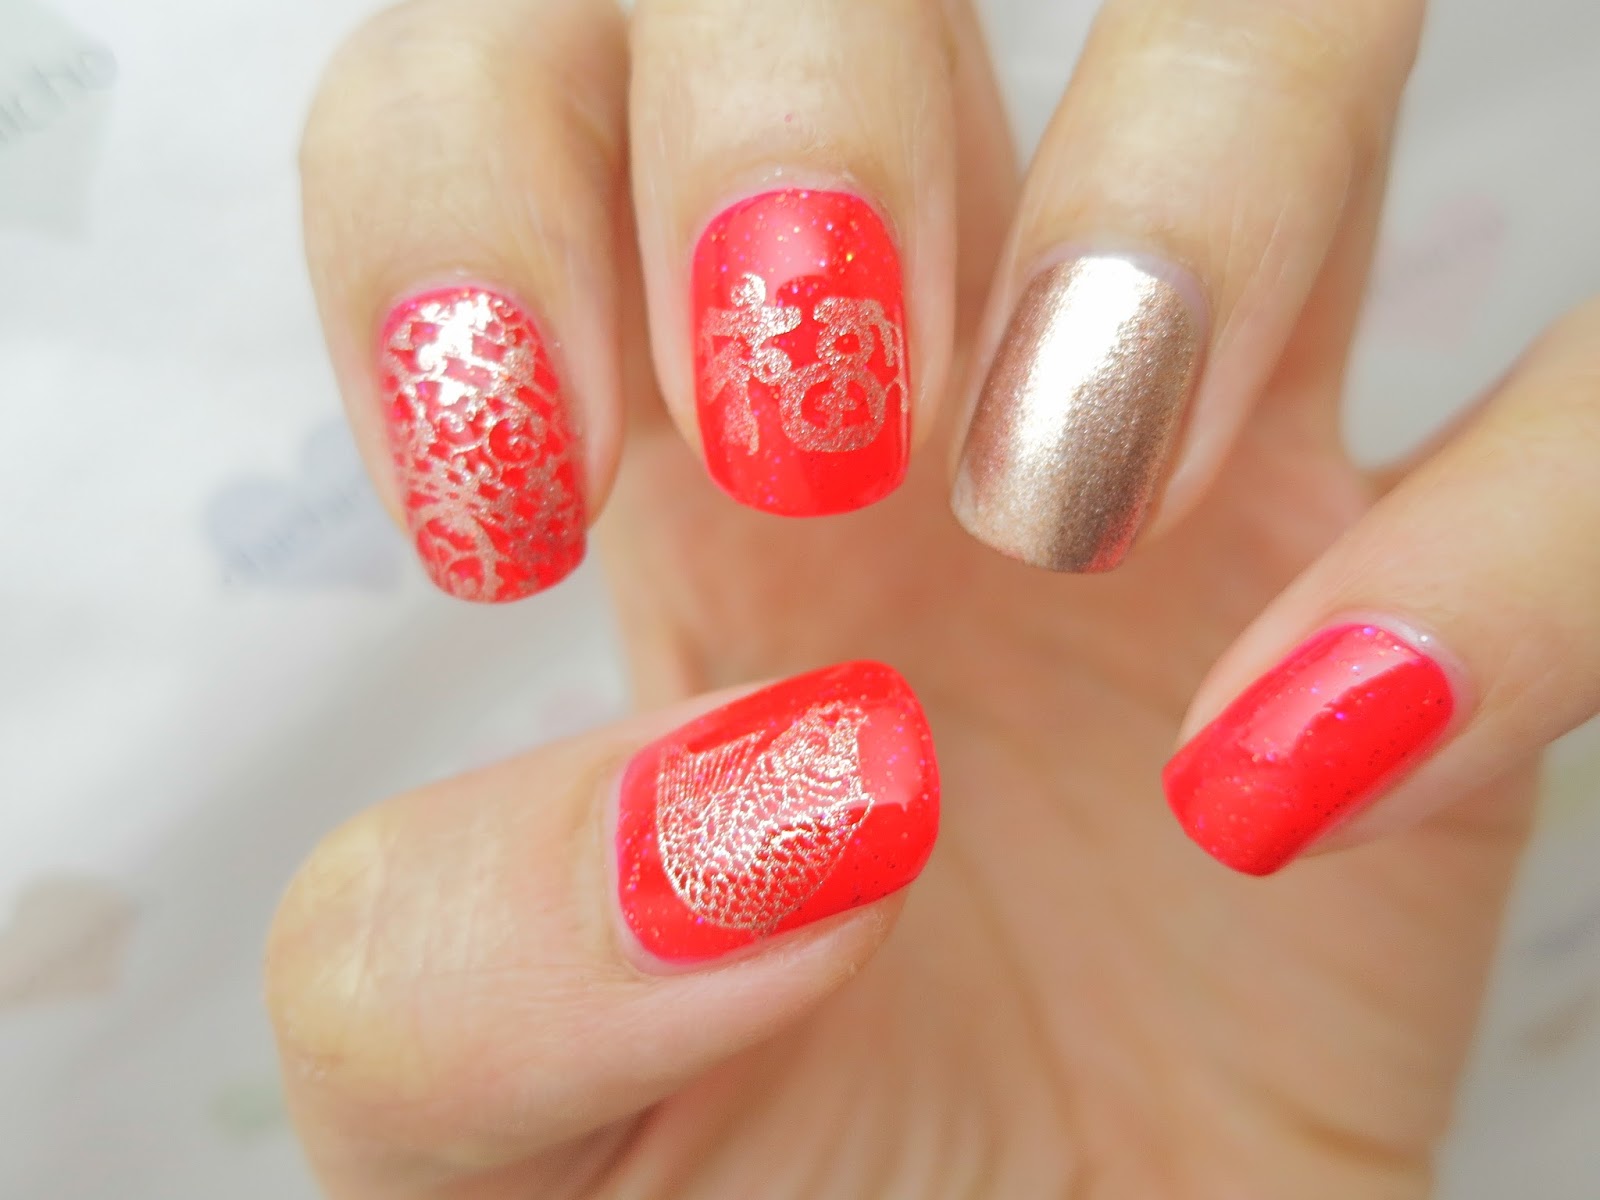 9. Pig Year Nail Art for Chinese New Year Celebration - wide 8